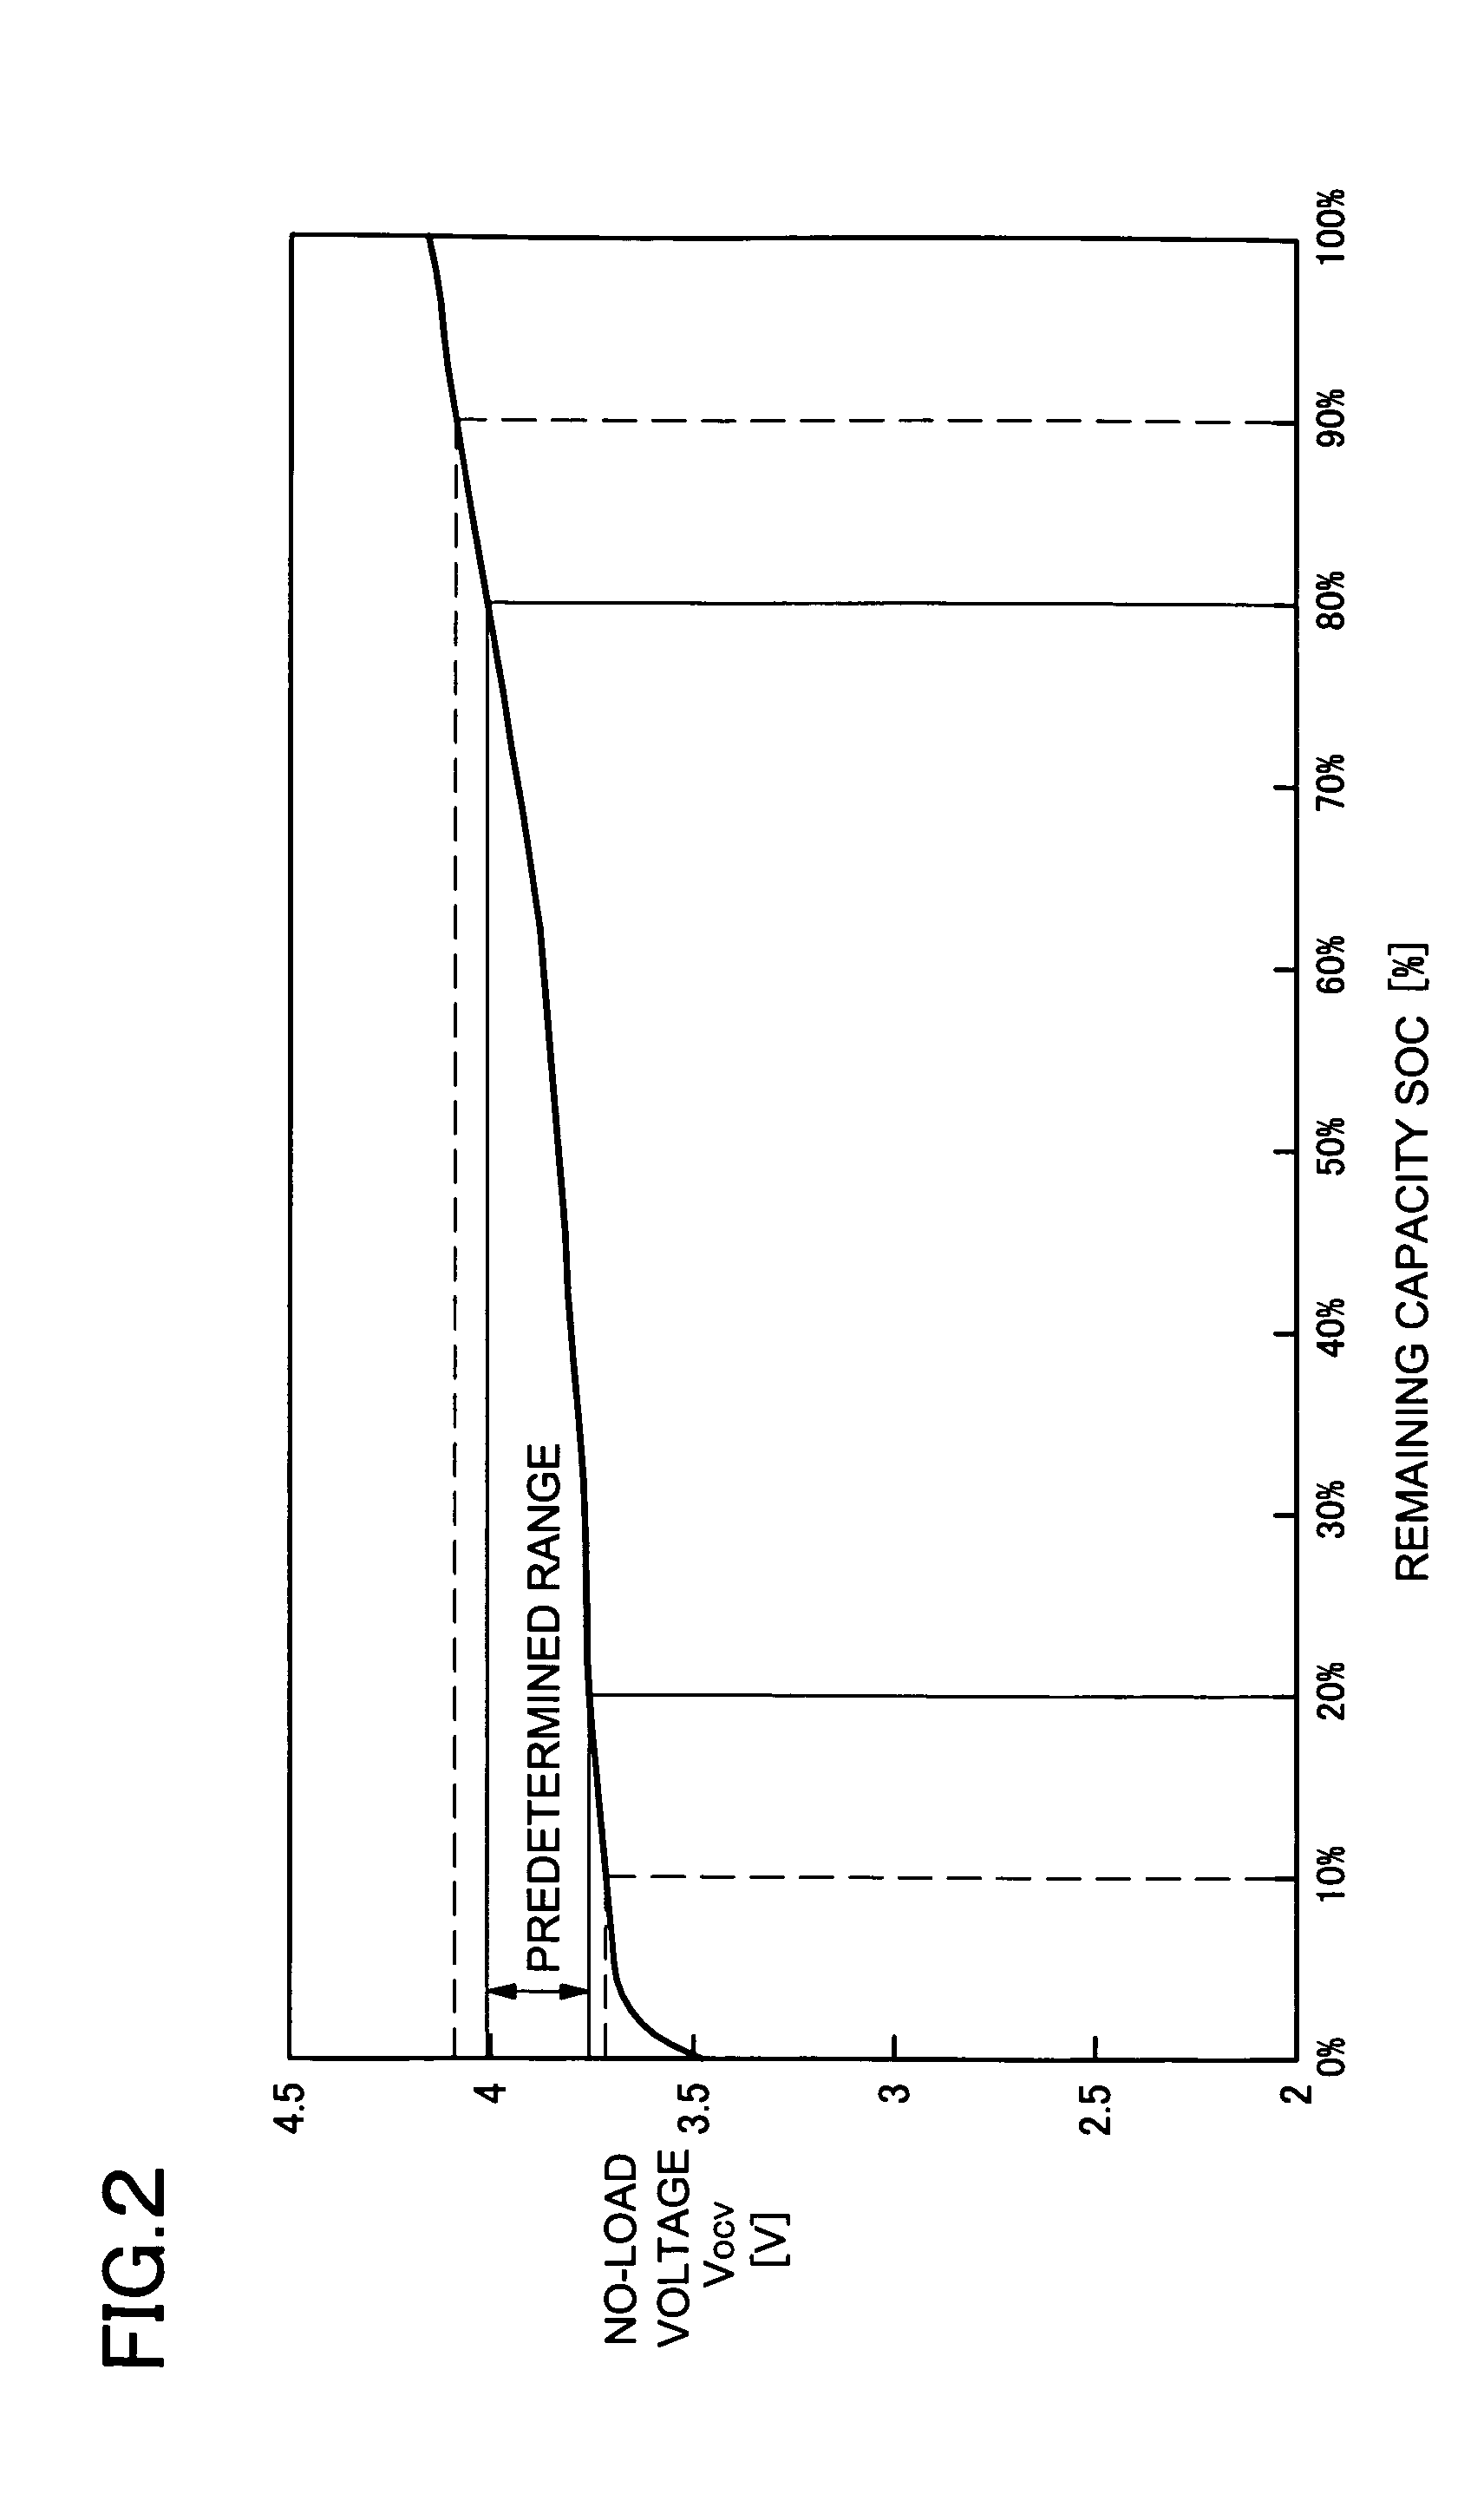 Fully-charged battery capacity detection method